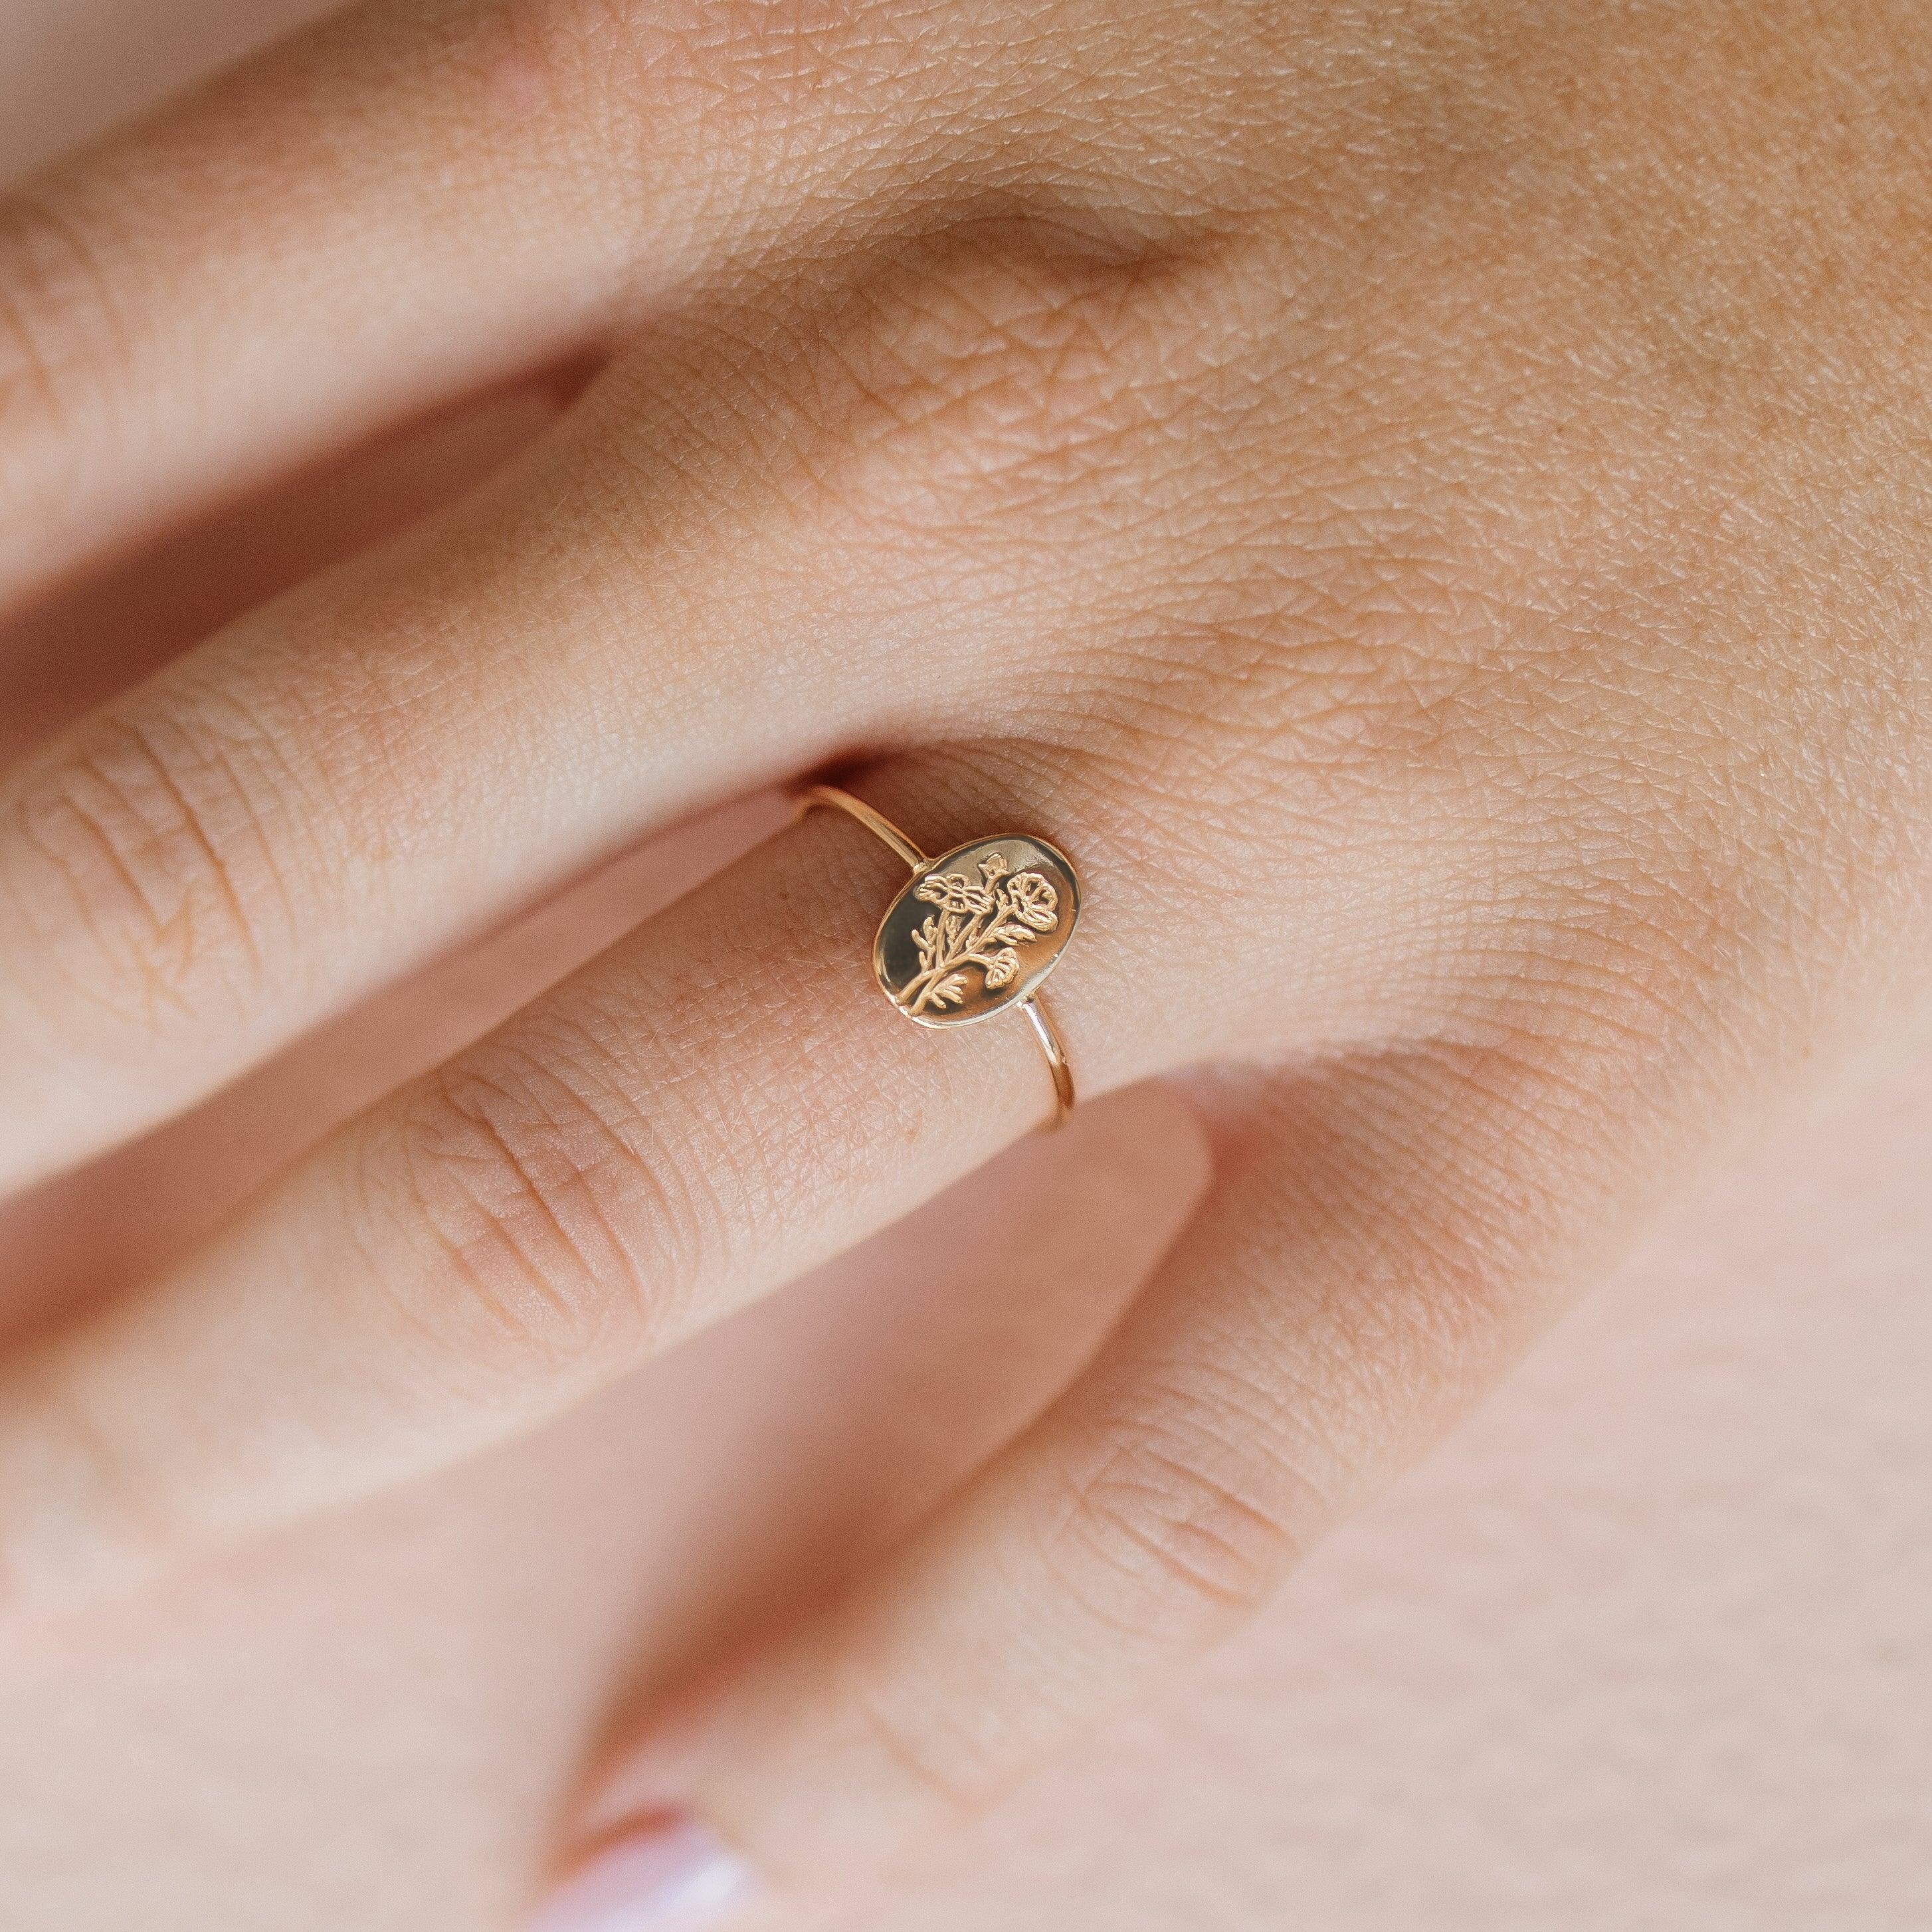 Fleur Birth Flower Ring - Nolia Jewelry - Meaningful + Sustainably Handcrafted Jewelry